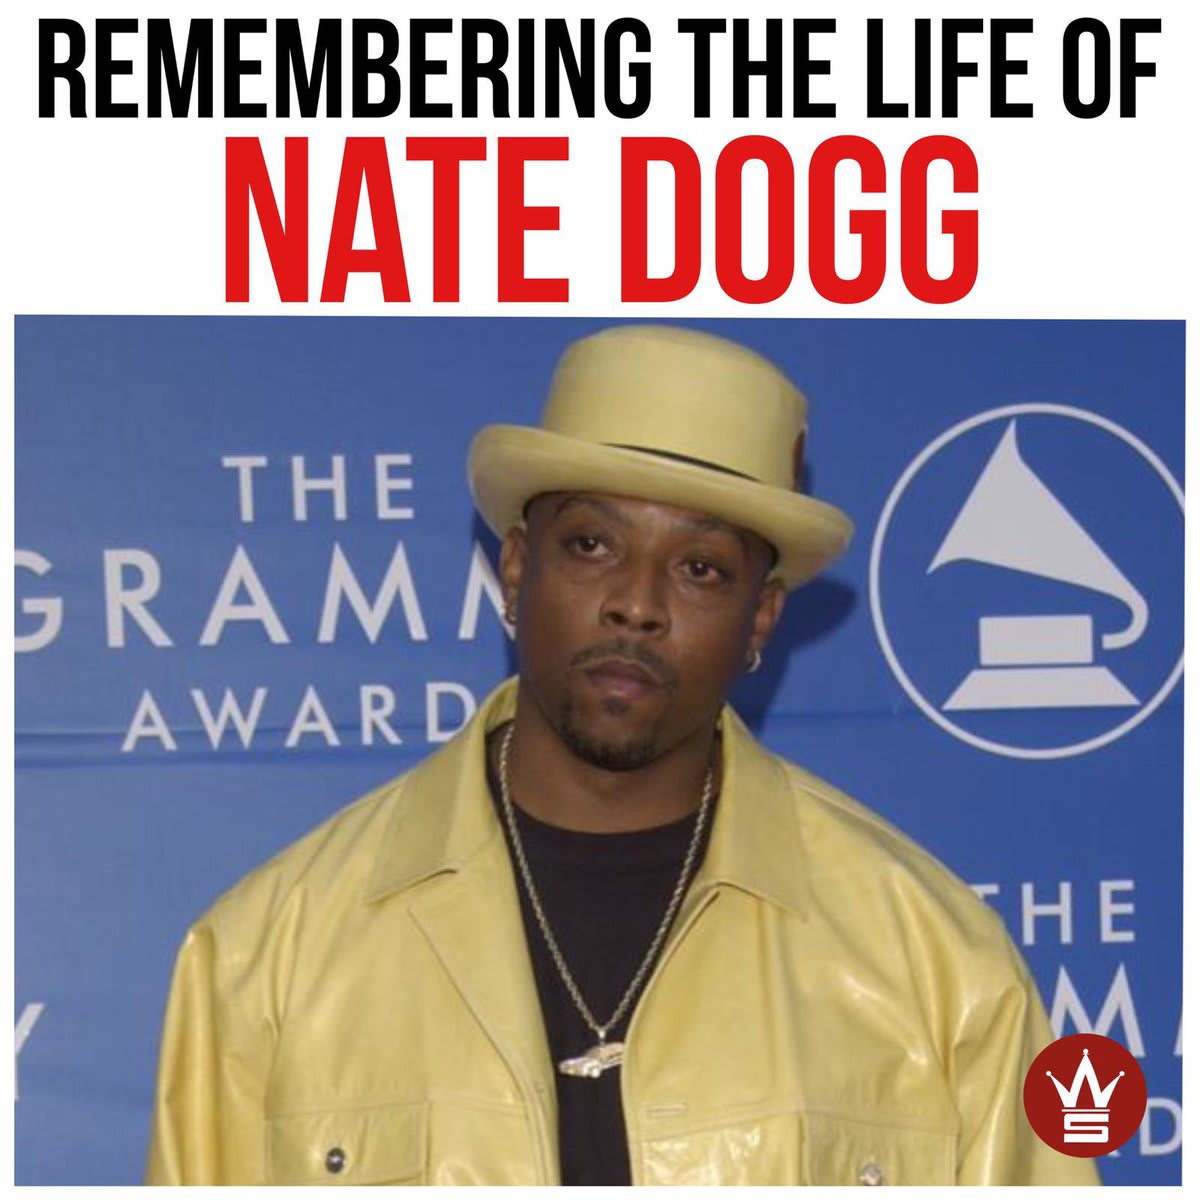 Today marks 10 years since the passing of #NateDogg. Our thoughts and prayers continue to be with his family and friends. Comment your favorite song of his below. 🙏